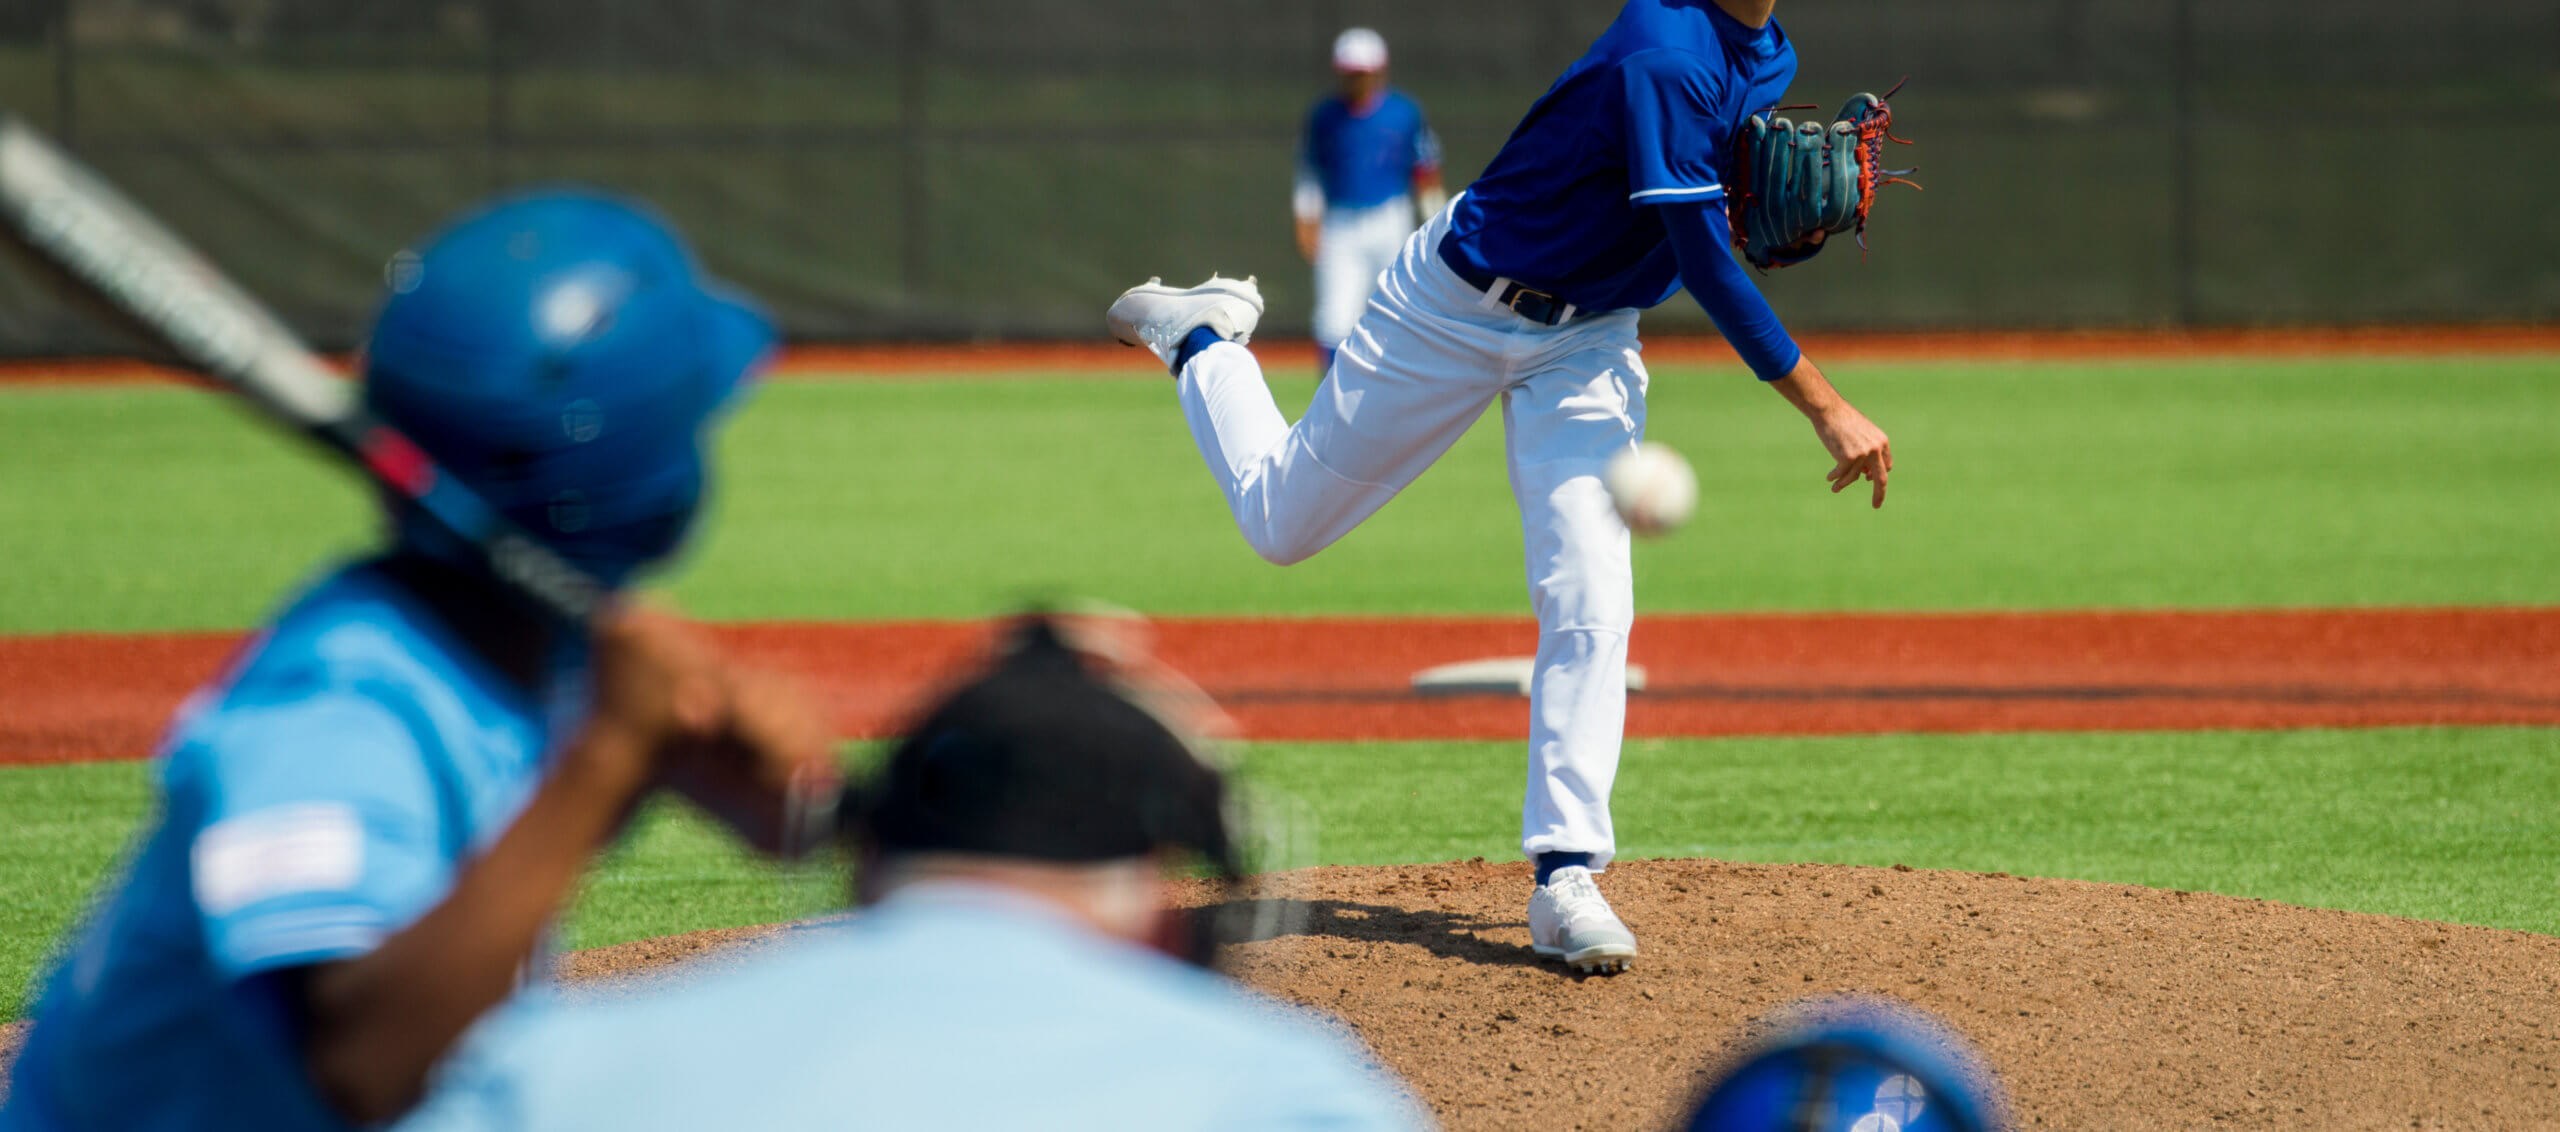 Pitcher and third baseman in blue jerseys during a baseball game. Pitcher has thrown the ball to the batter. The pitcher, batter, catcher, and outfield are all visible in the picture.